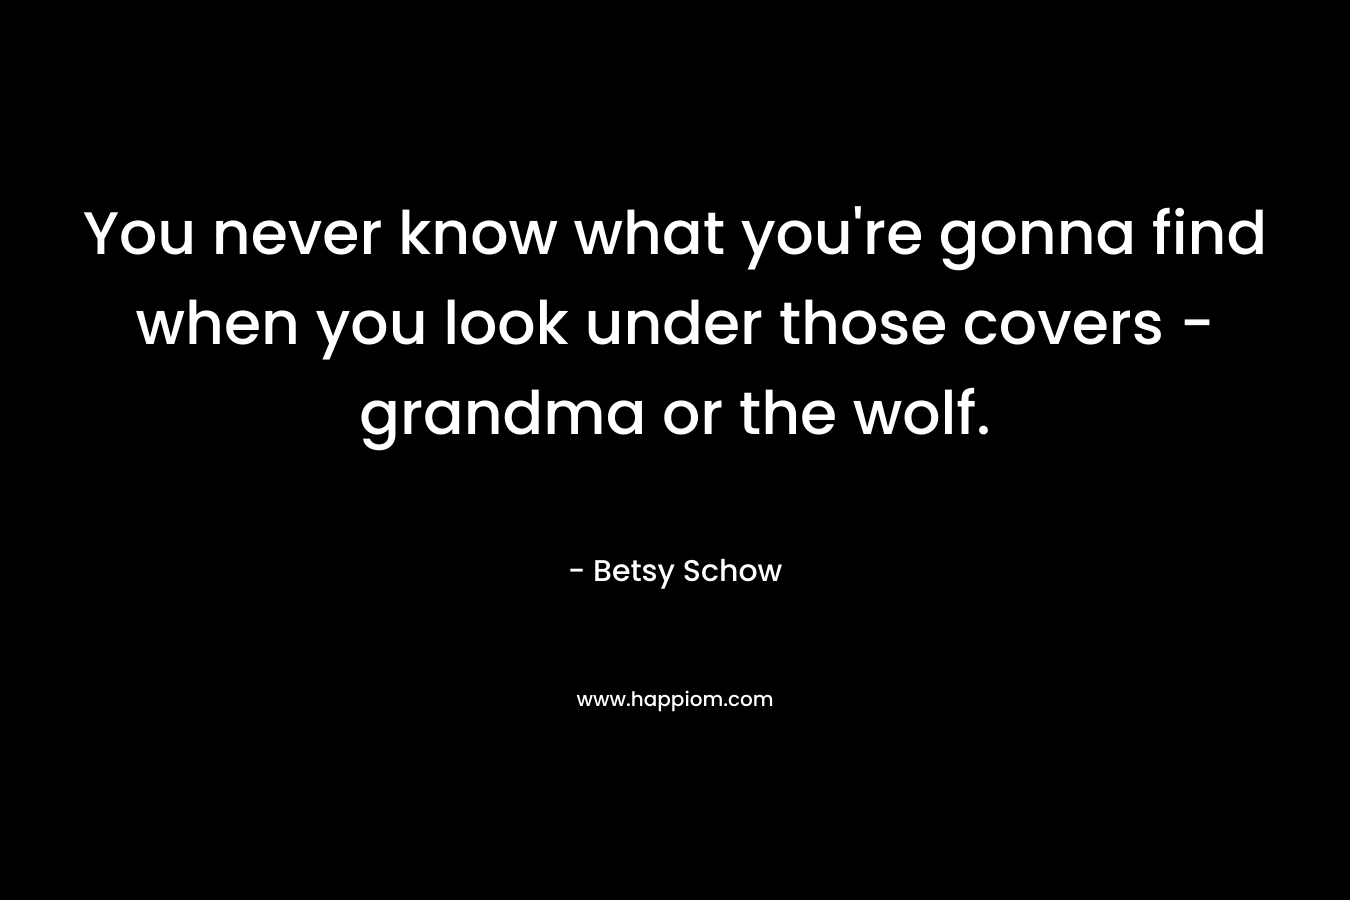 You never know what you're gonna find when you look under those covers - grandma or the wolf.